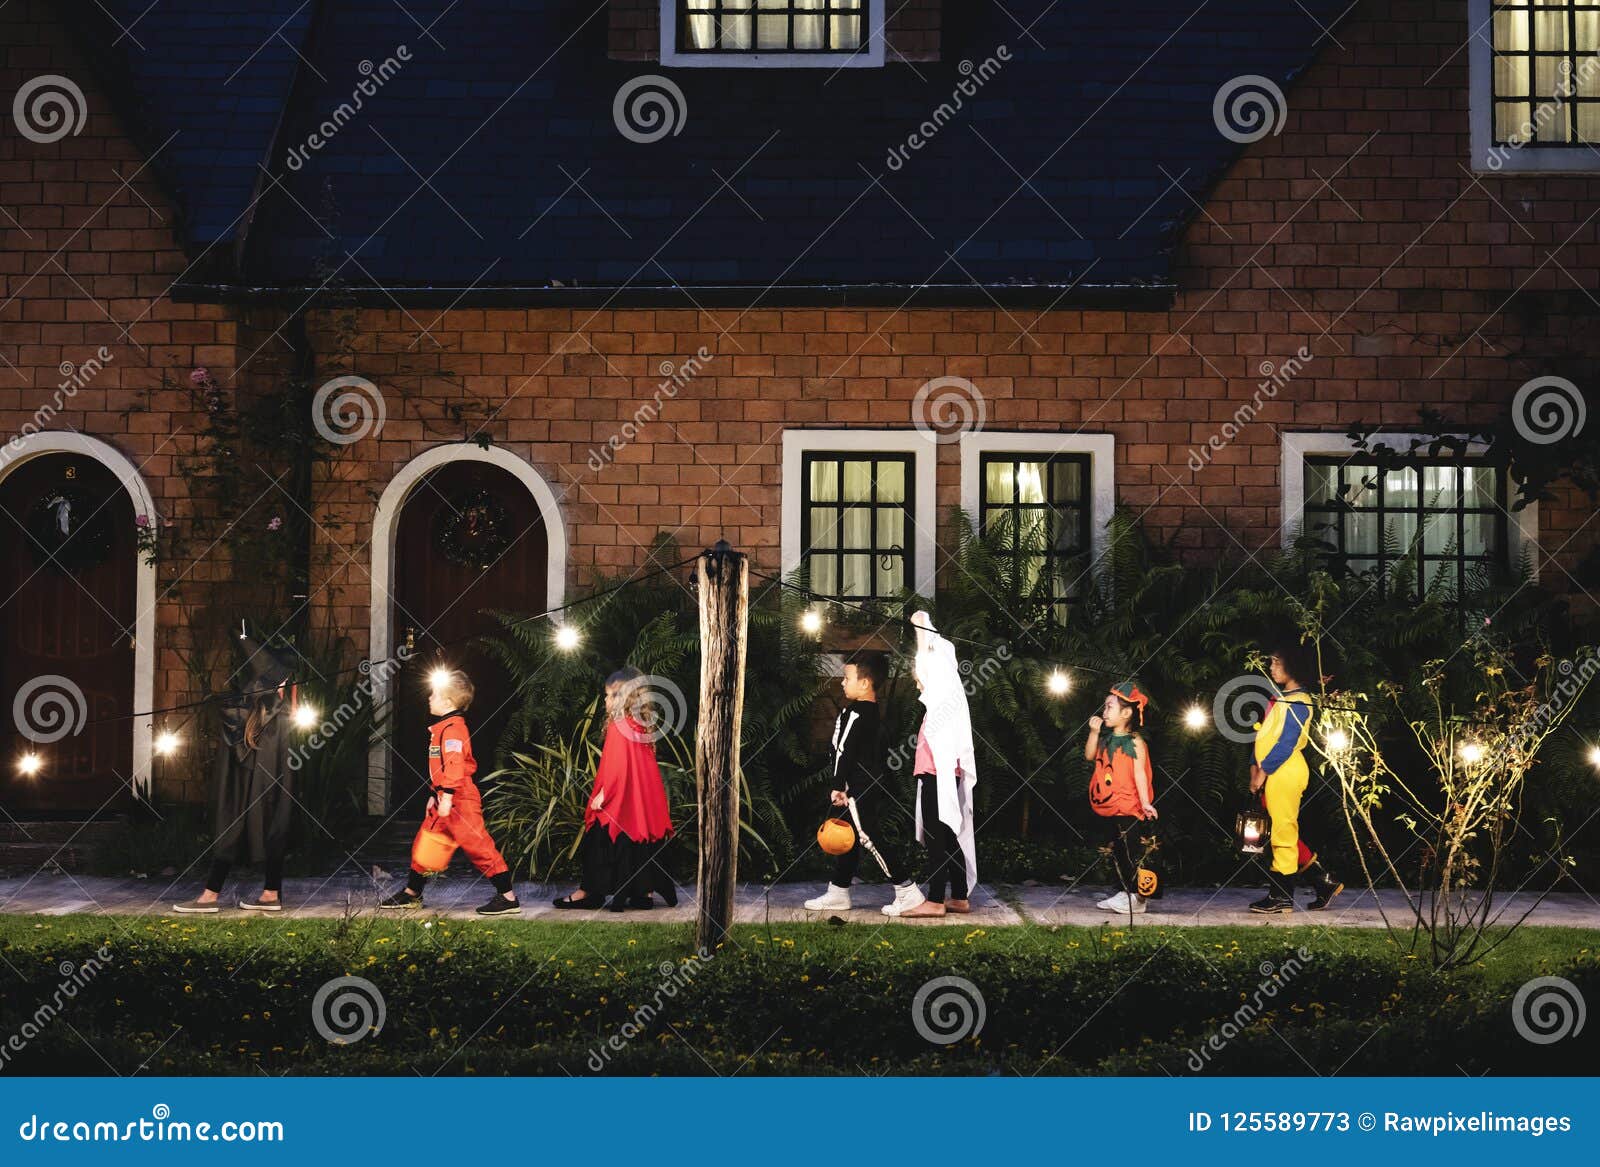 group of kids with halloween costumes walking to trick or treating